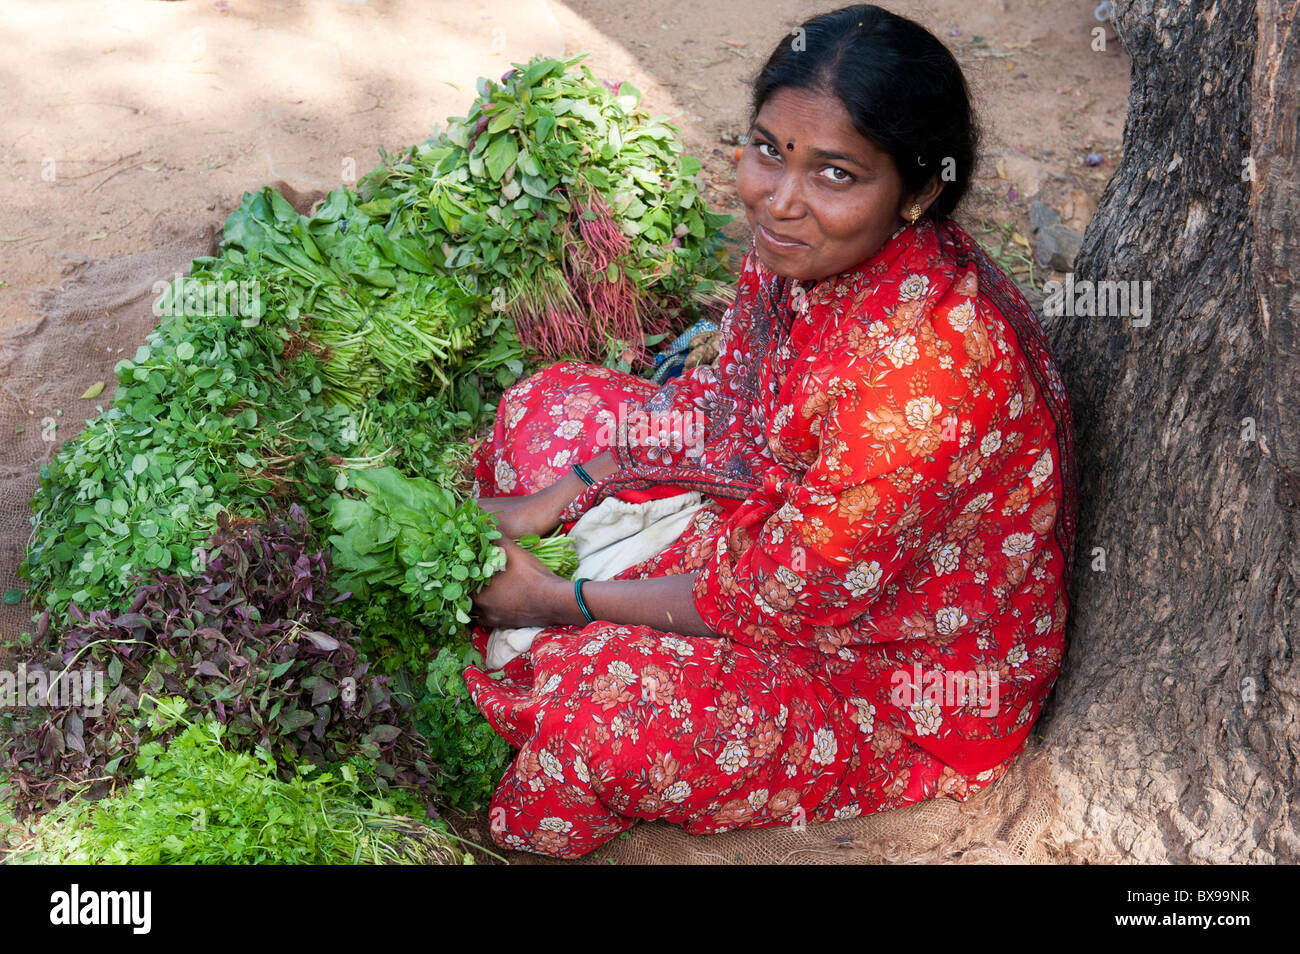 India woman selling bunches of fresh herbs and spinach at an Indian market. Andhra Pradesh India Stock Photo